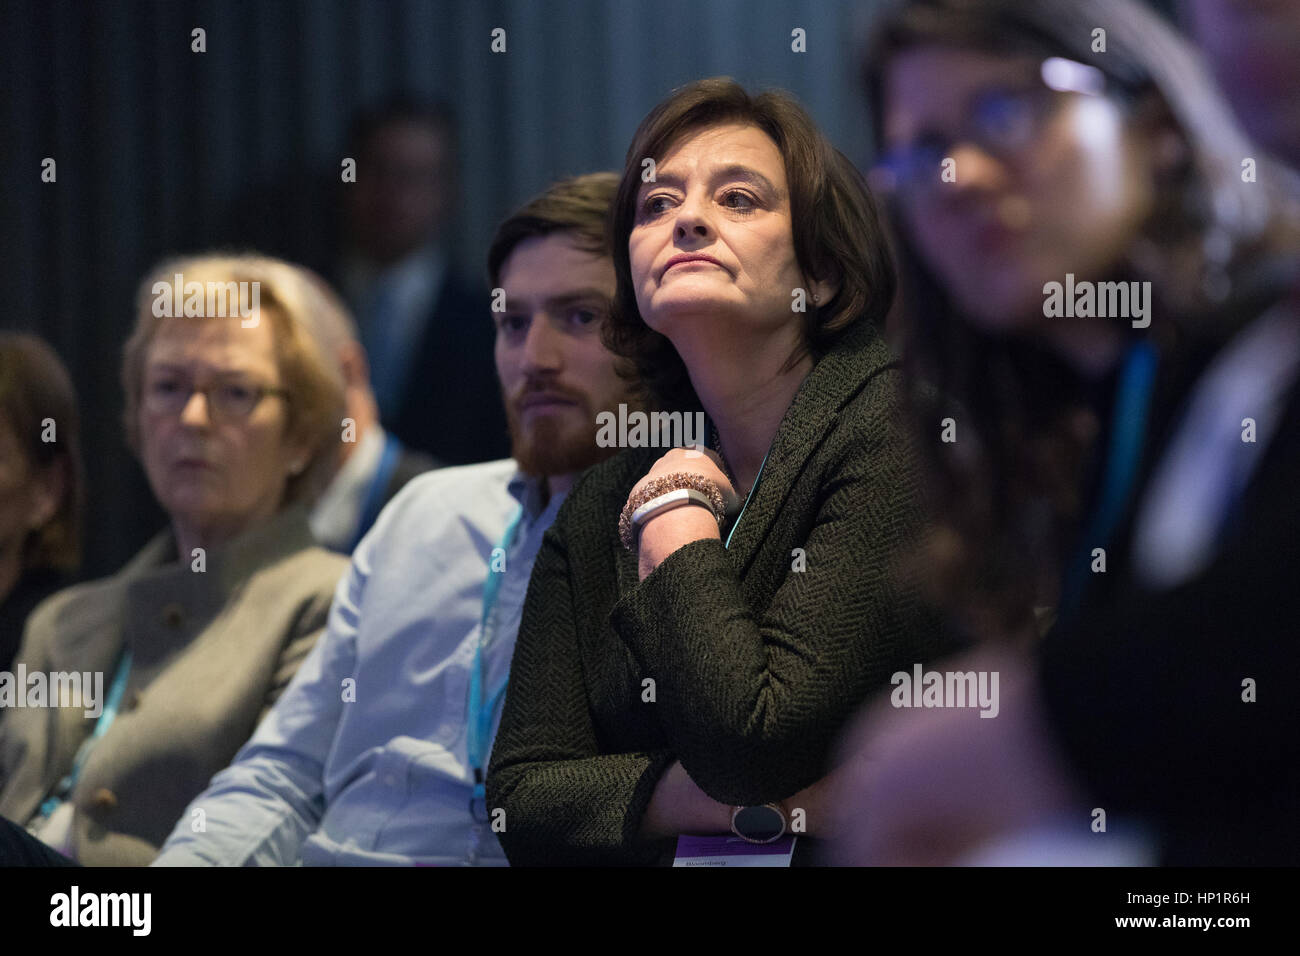 London, UK. 17th Feb 2017. Wife of Tony Blair, Cherie Blair listens to Tony Blair making a keynote speech about Brexit at an Open Britain event held at Bloomberg in London. In his first major speech since the European Union (EU) referendum, former Prime Minister, Tony Blair has called for Remain supporters to fight to stop Brexit, claiming that voters were misinformed when they voted for Brexit and that Prime Minister, Theresa MayÕs agenda is being dictated by hardline Eurosceptics. Credit: Vickie Flores/Alamy Live News Stock Photo